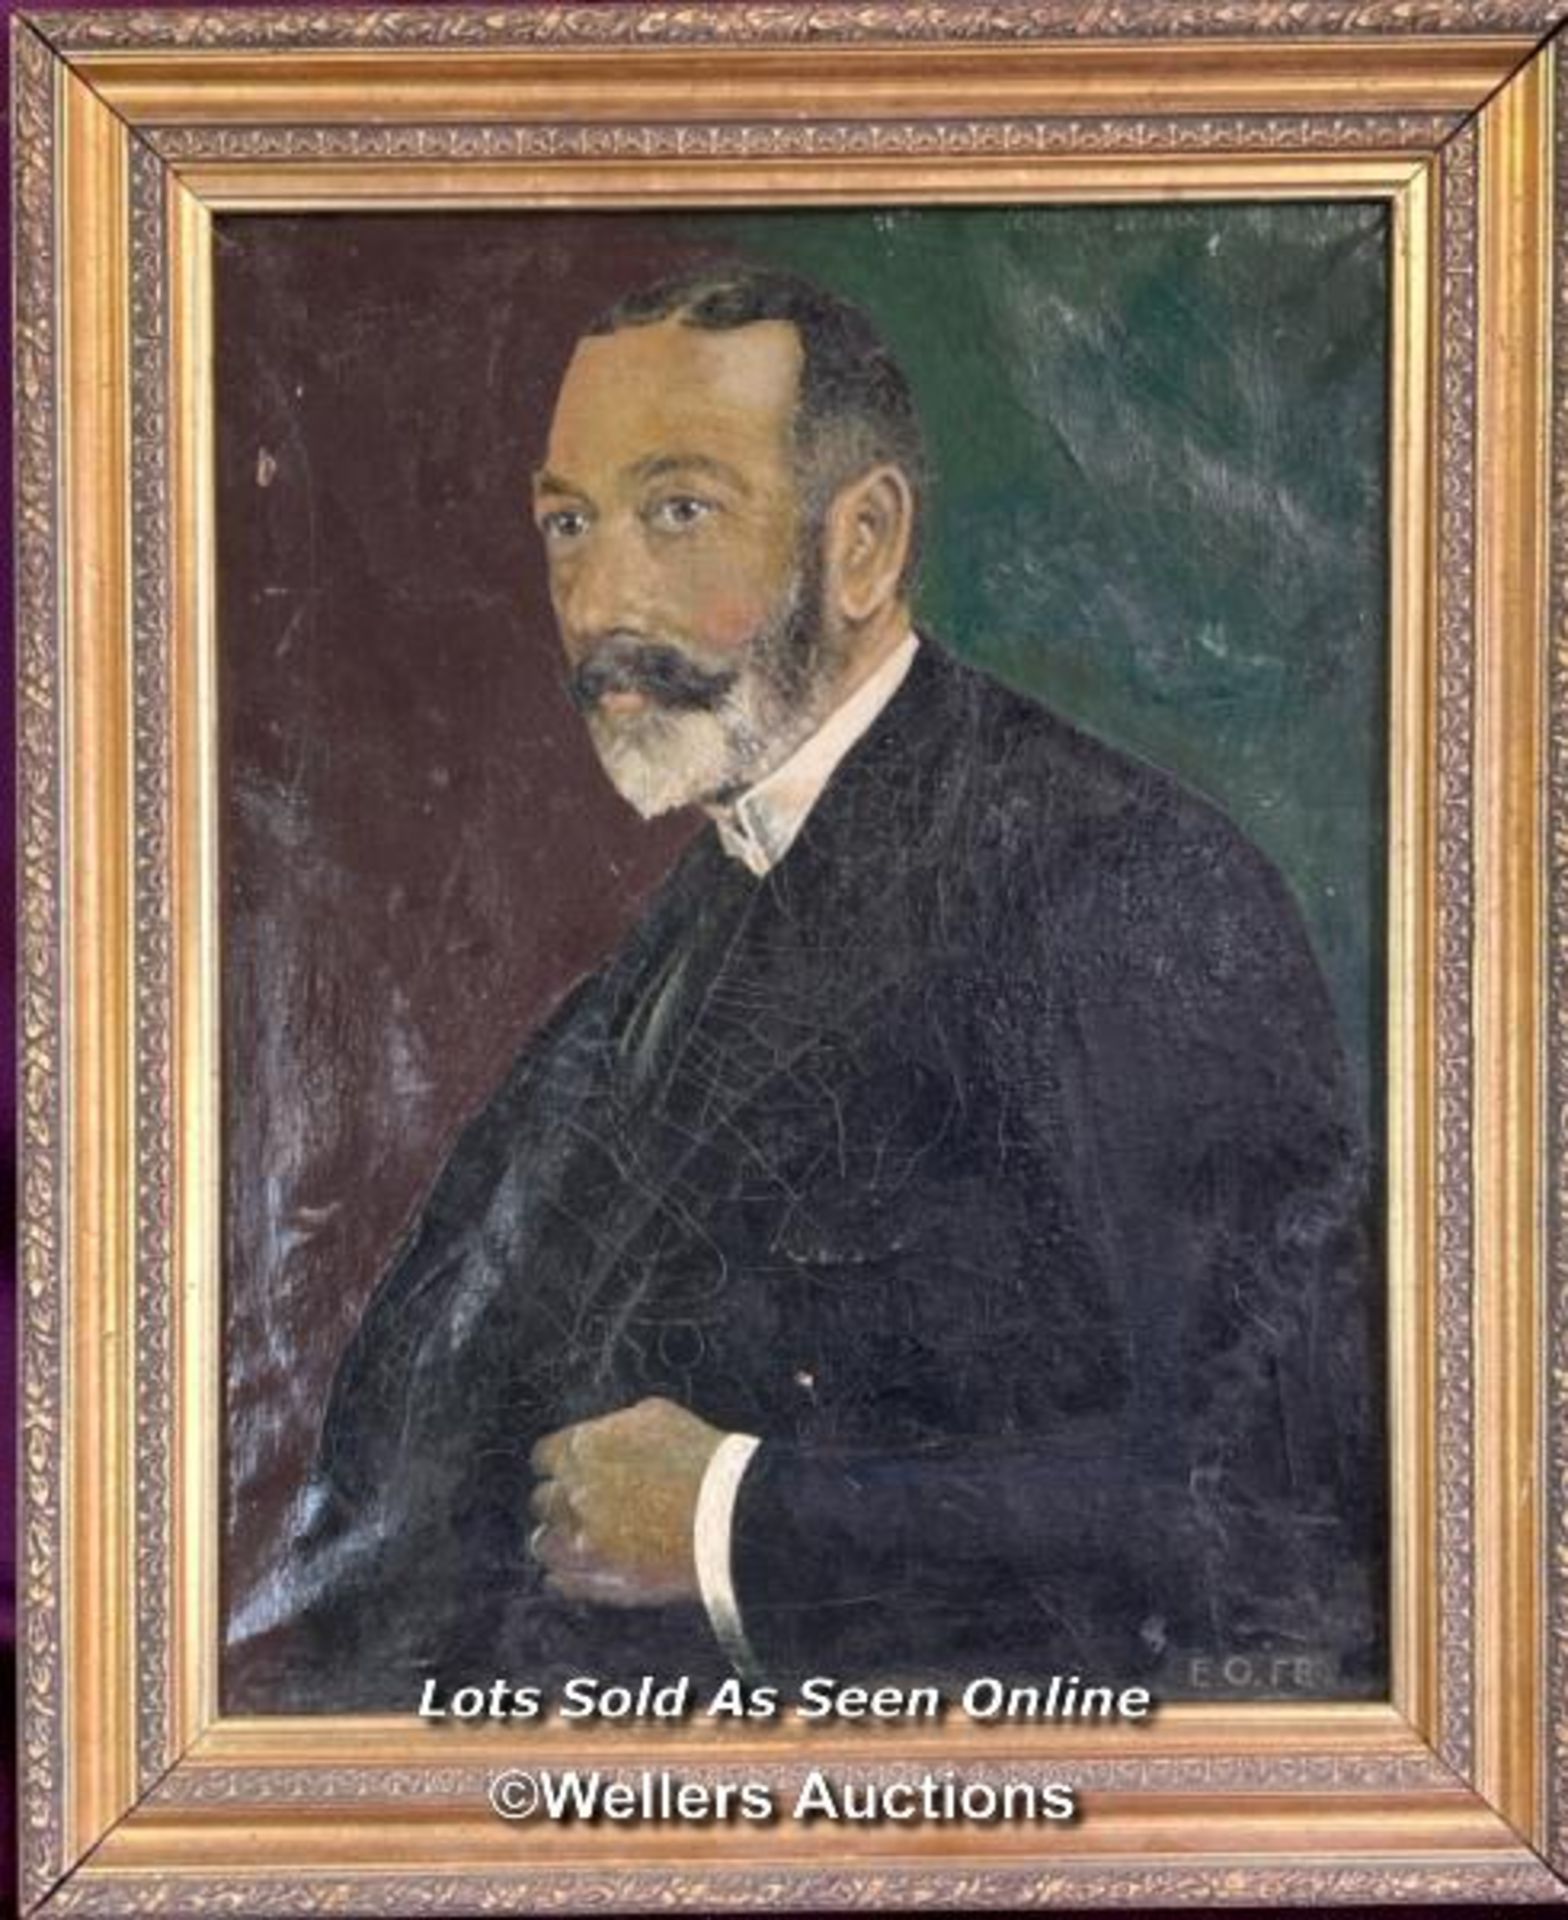 OIL ON CANVAS DEPICTING A GENTLEMEN, IN A DECORATIVE GILT FRAME, SIGNED E.O. FRY, 43.5 X 55CM